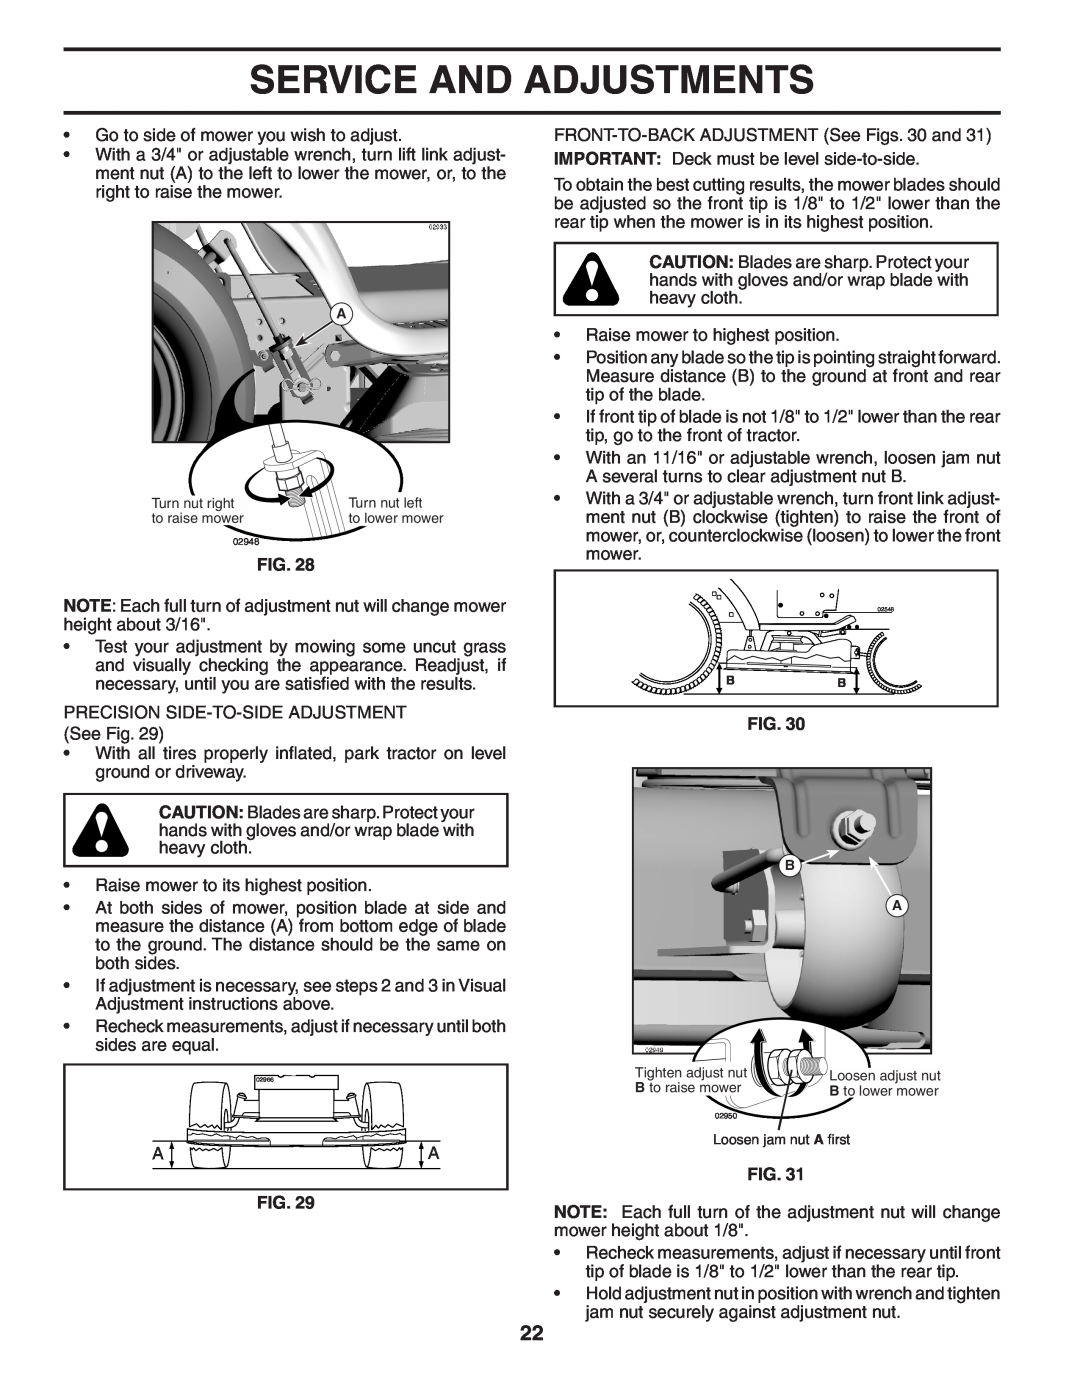 Poulan 402495 manual Service And Adjustments, Turn nut right, Turn nut left, Tighten adjust nut, B to raise mower 